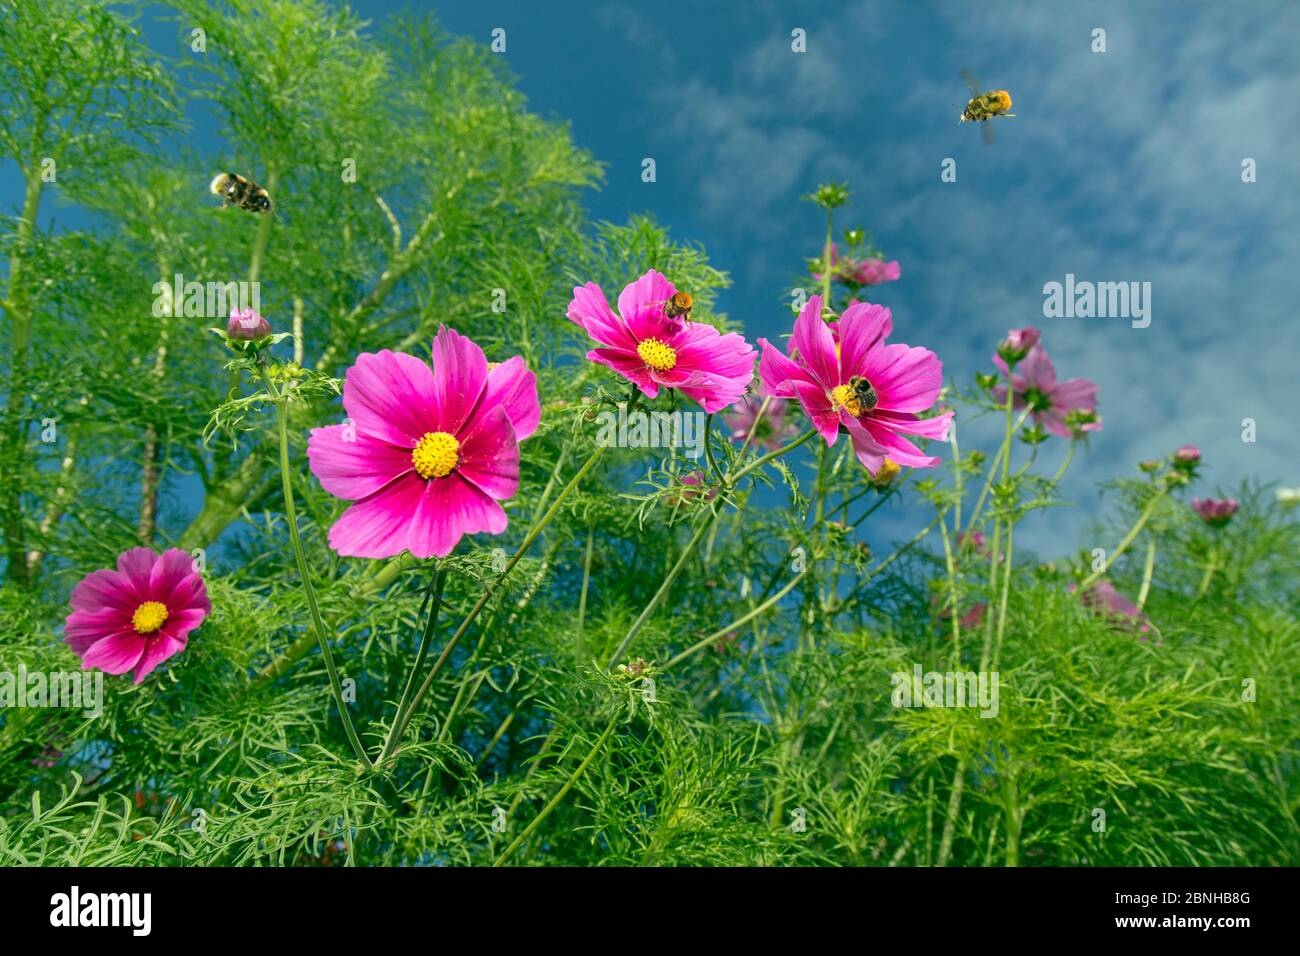 Cosmos flower (Cosmos bipinnatus) cultivated plant in garden border, with Bumblebee (Bombus sp)s in flight. Stock Photo